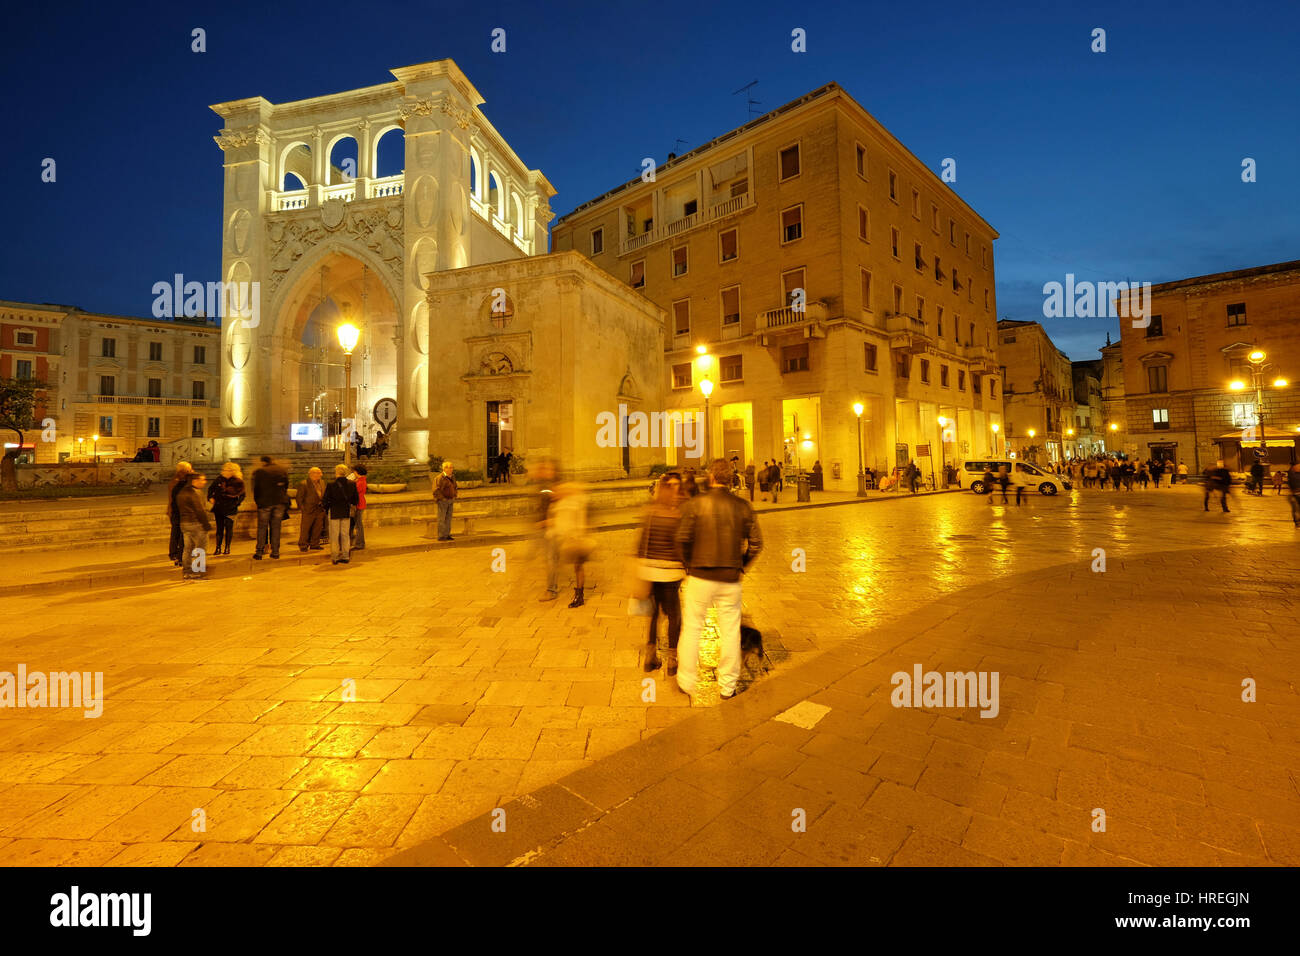 People wandering around Sant Oronzo square, early evening Lecce, Puglia, Italy Stock Photo